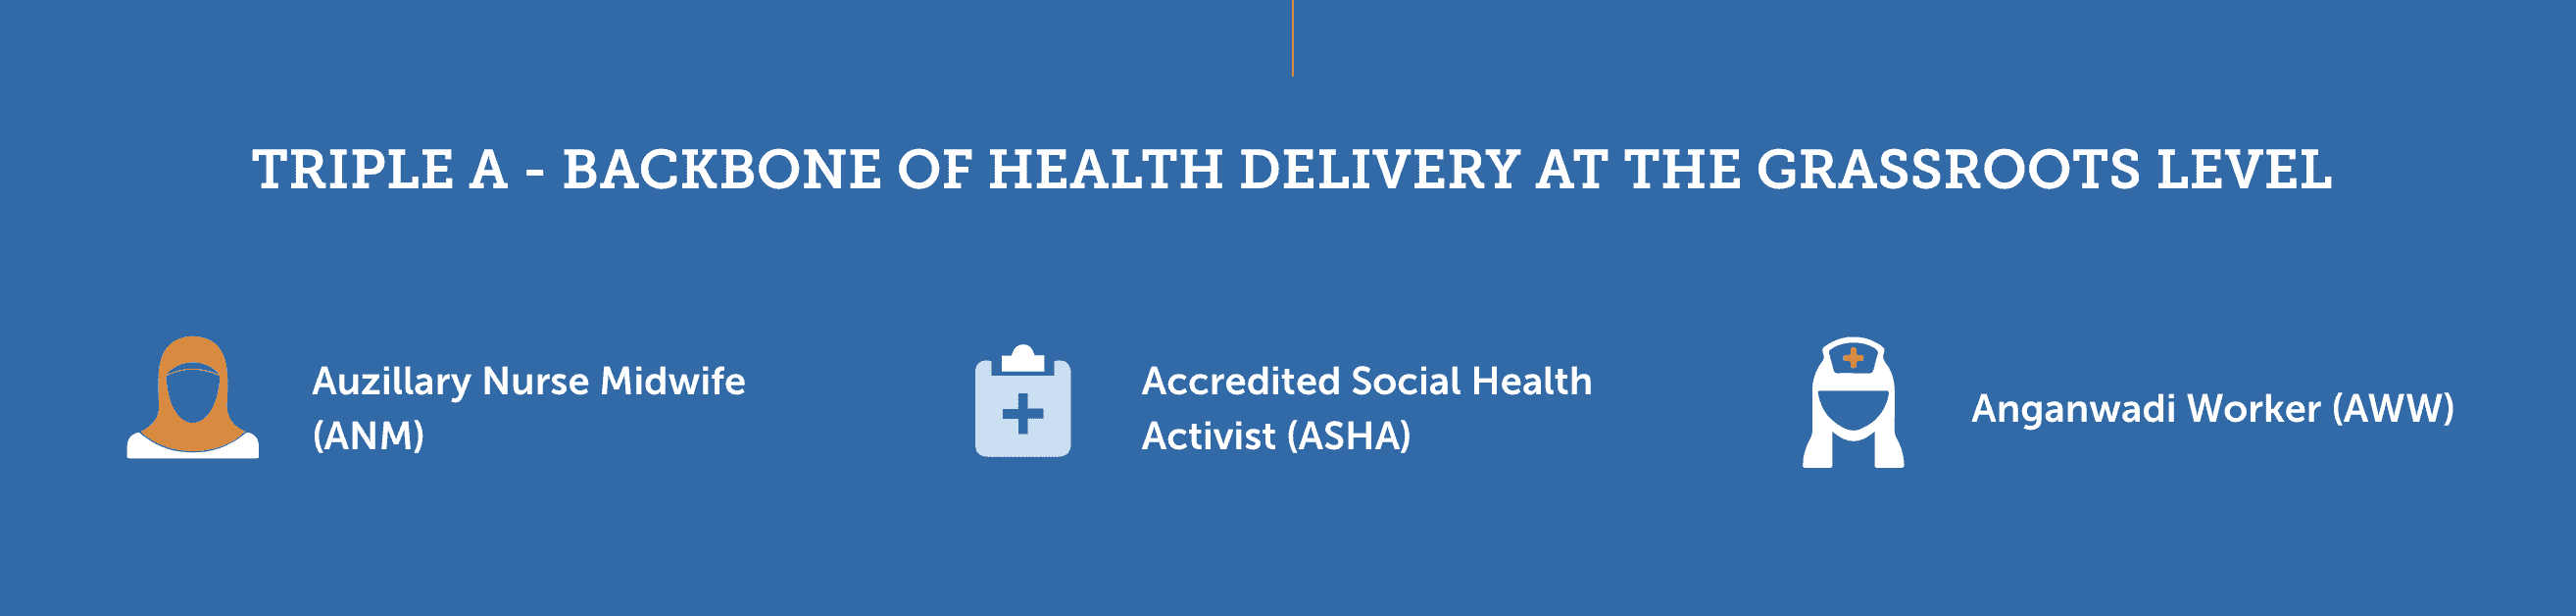 Triple A - Backbone of Health Delivery at the Grassroots Level Auzillary Nurse Midwife (ANM) Accredited Social Health Activist (ASHA) Anganwadi Worker (AWW)